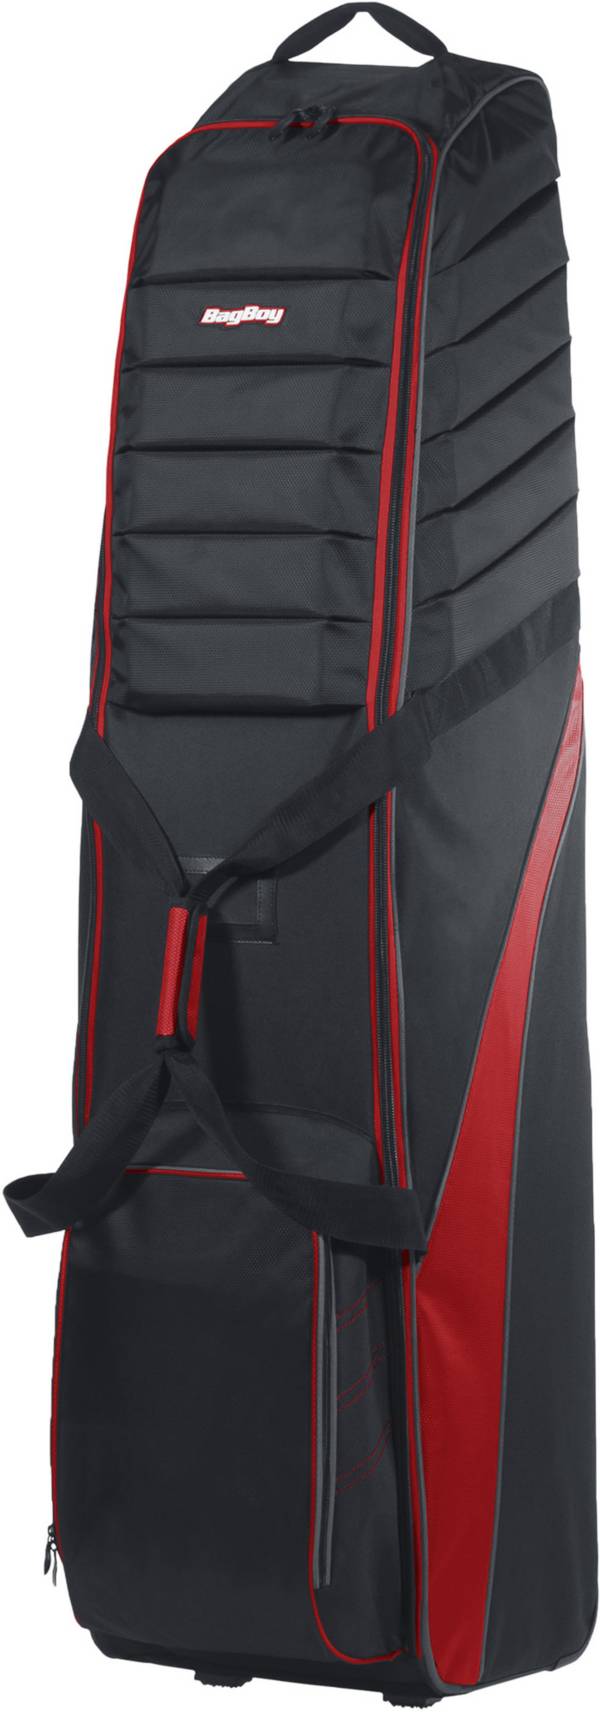 Bag Boy 2021 T-750 Travel Cover product image